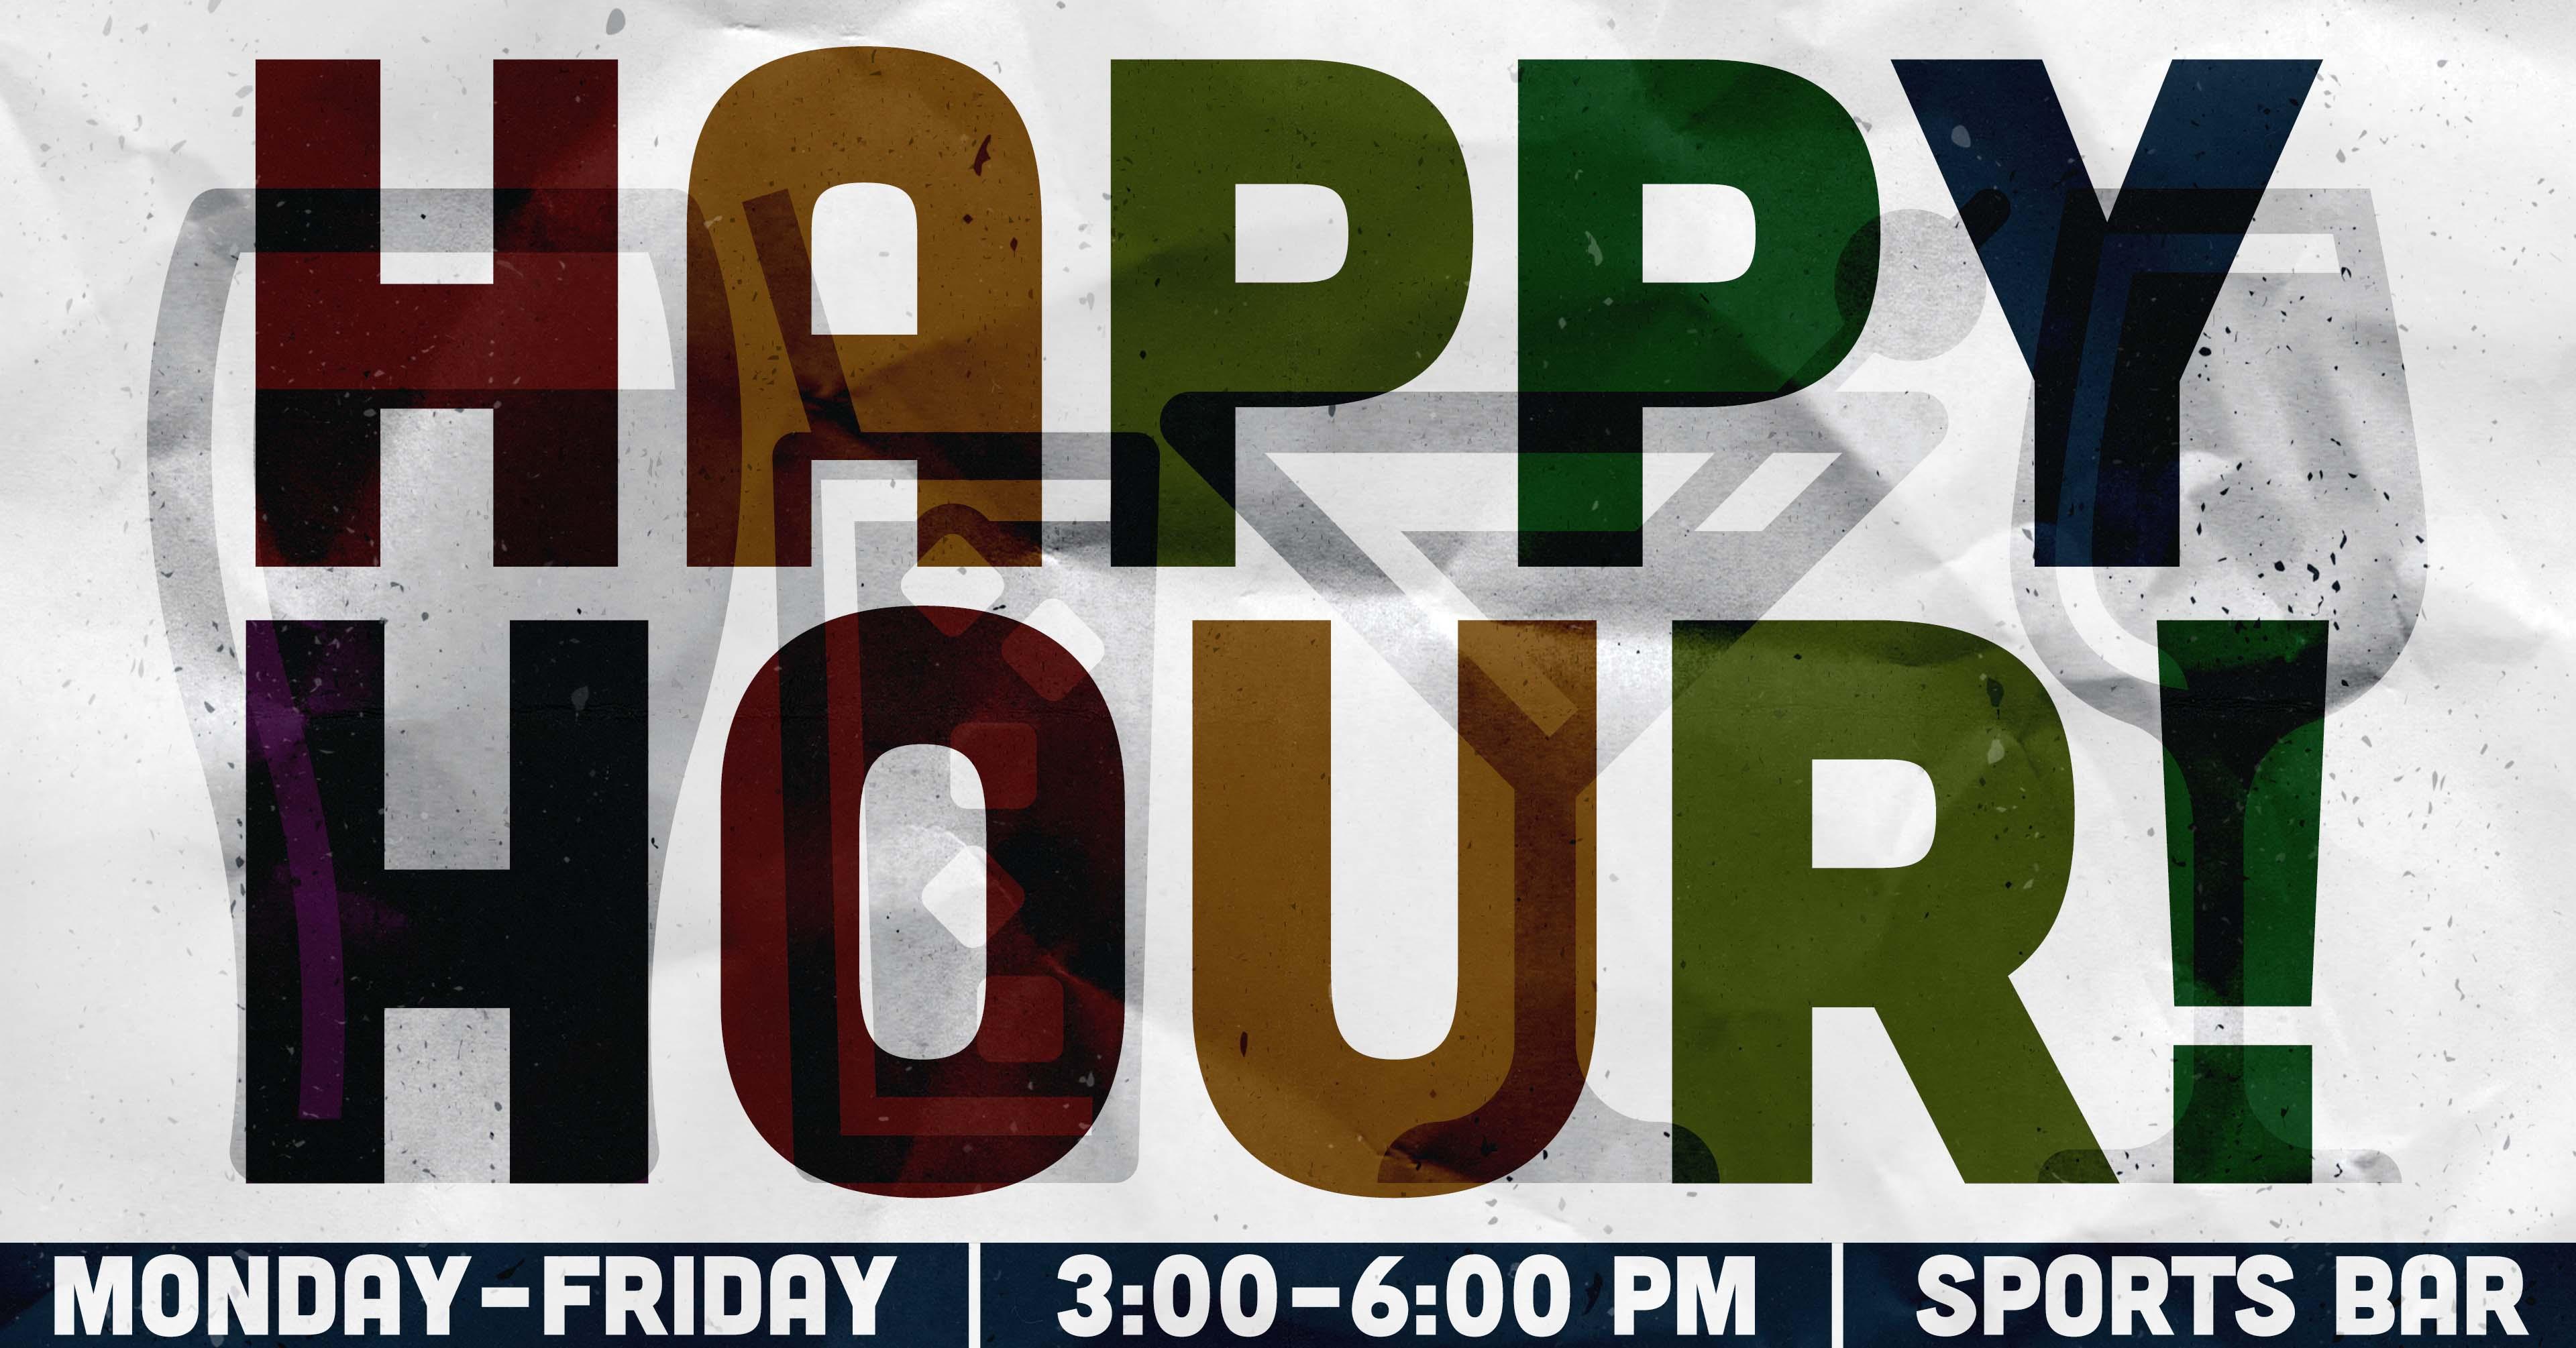 Sports Bar Happy Hour, Monday–Friday 3:00–6:00 PM